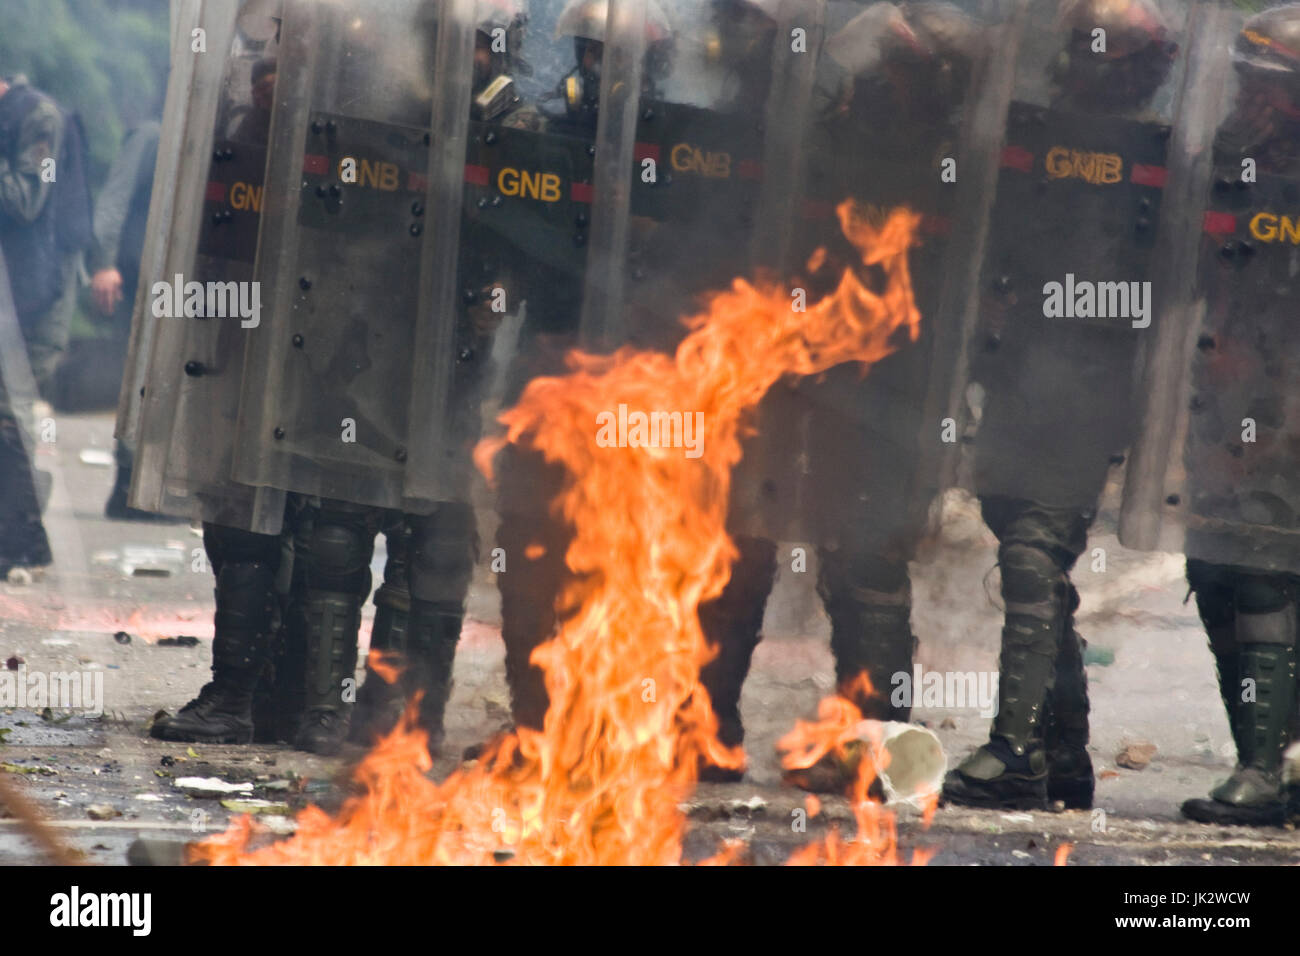 The Bolivarian National Guard try to disperse a group of demonstrators that were blocking the streets in Caracas protesting against president Maduro. Stock Photo